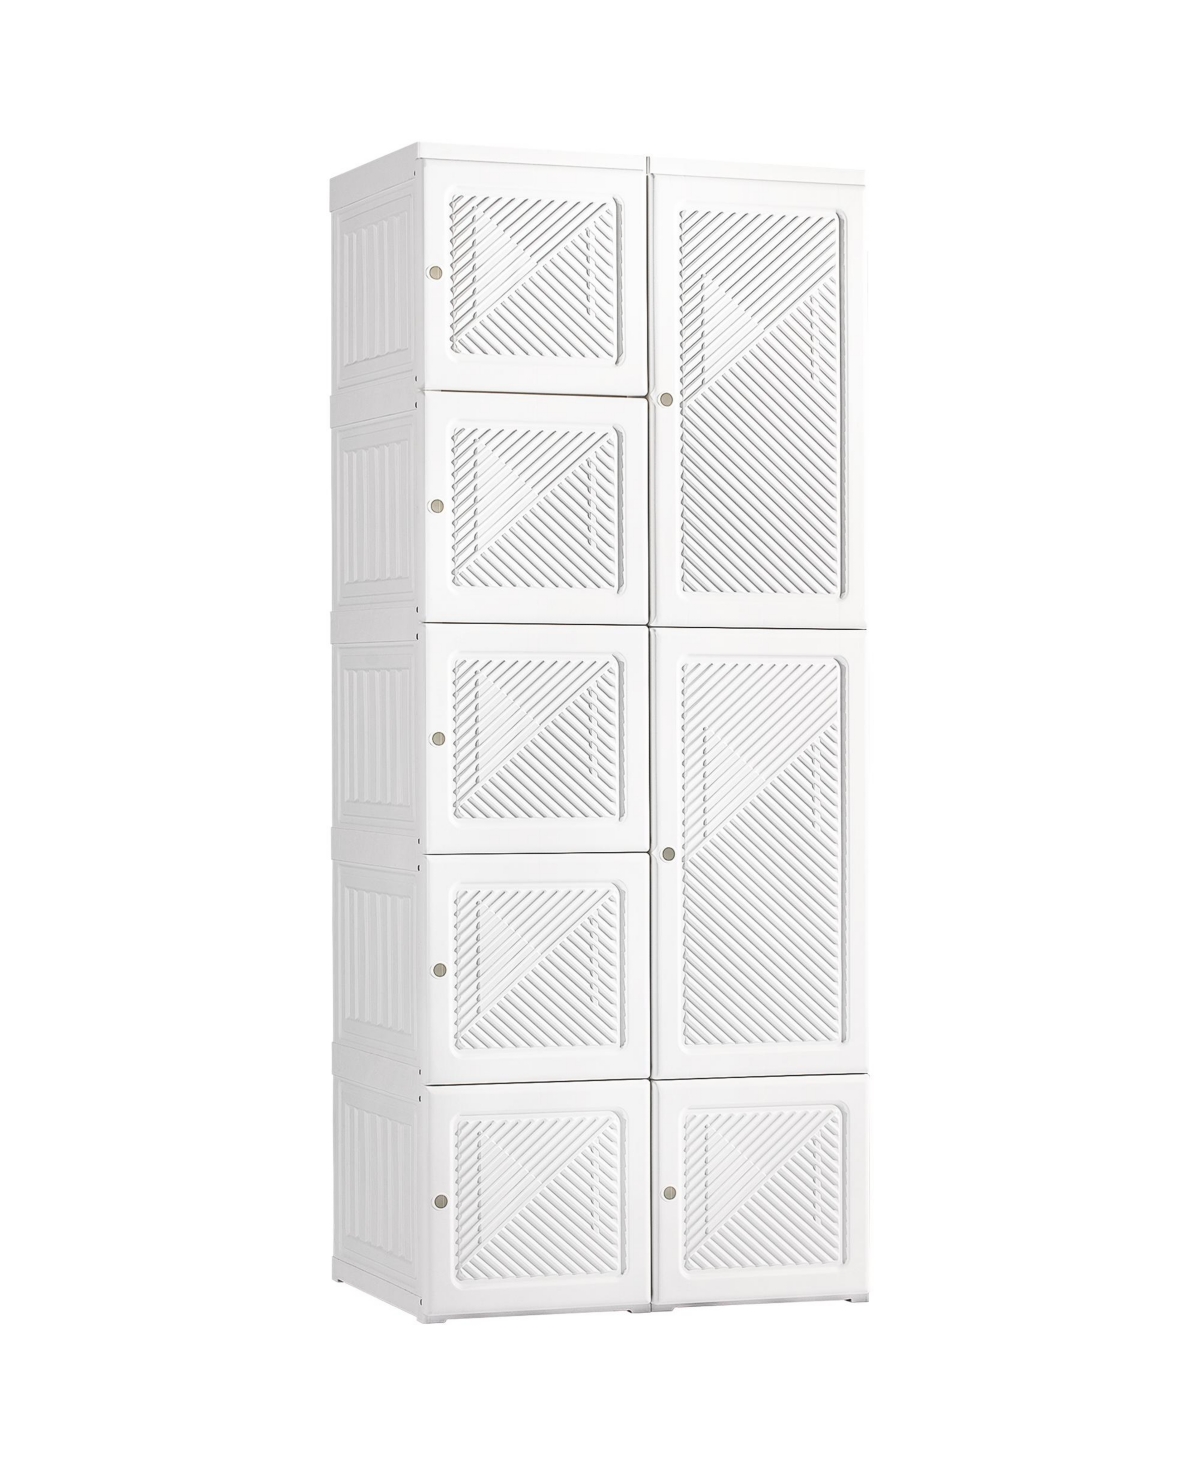 Portable Wardrobe Closet, Folding Bedroom Armoire, Clothes Storage Organizer with Cube Compartments, Hanging Rod, Magnet Doors, White - White